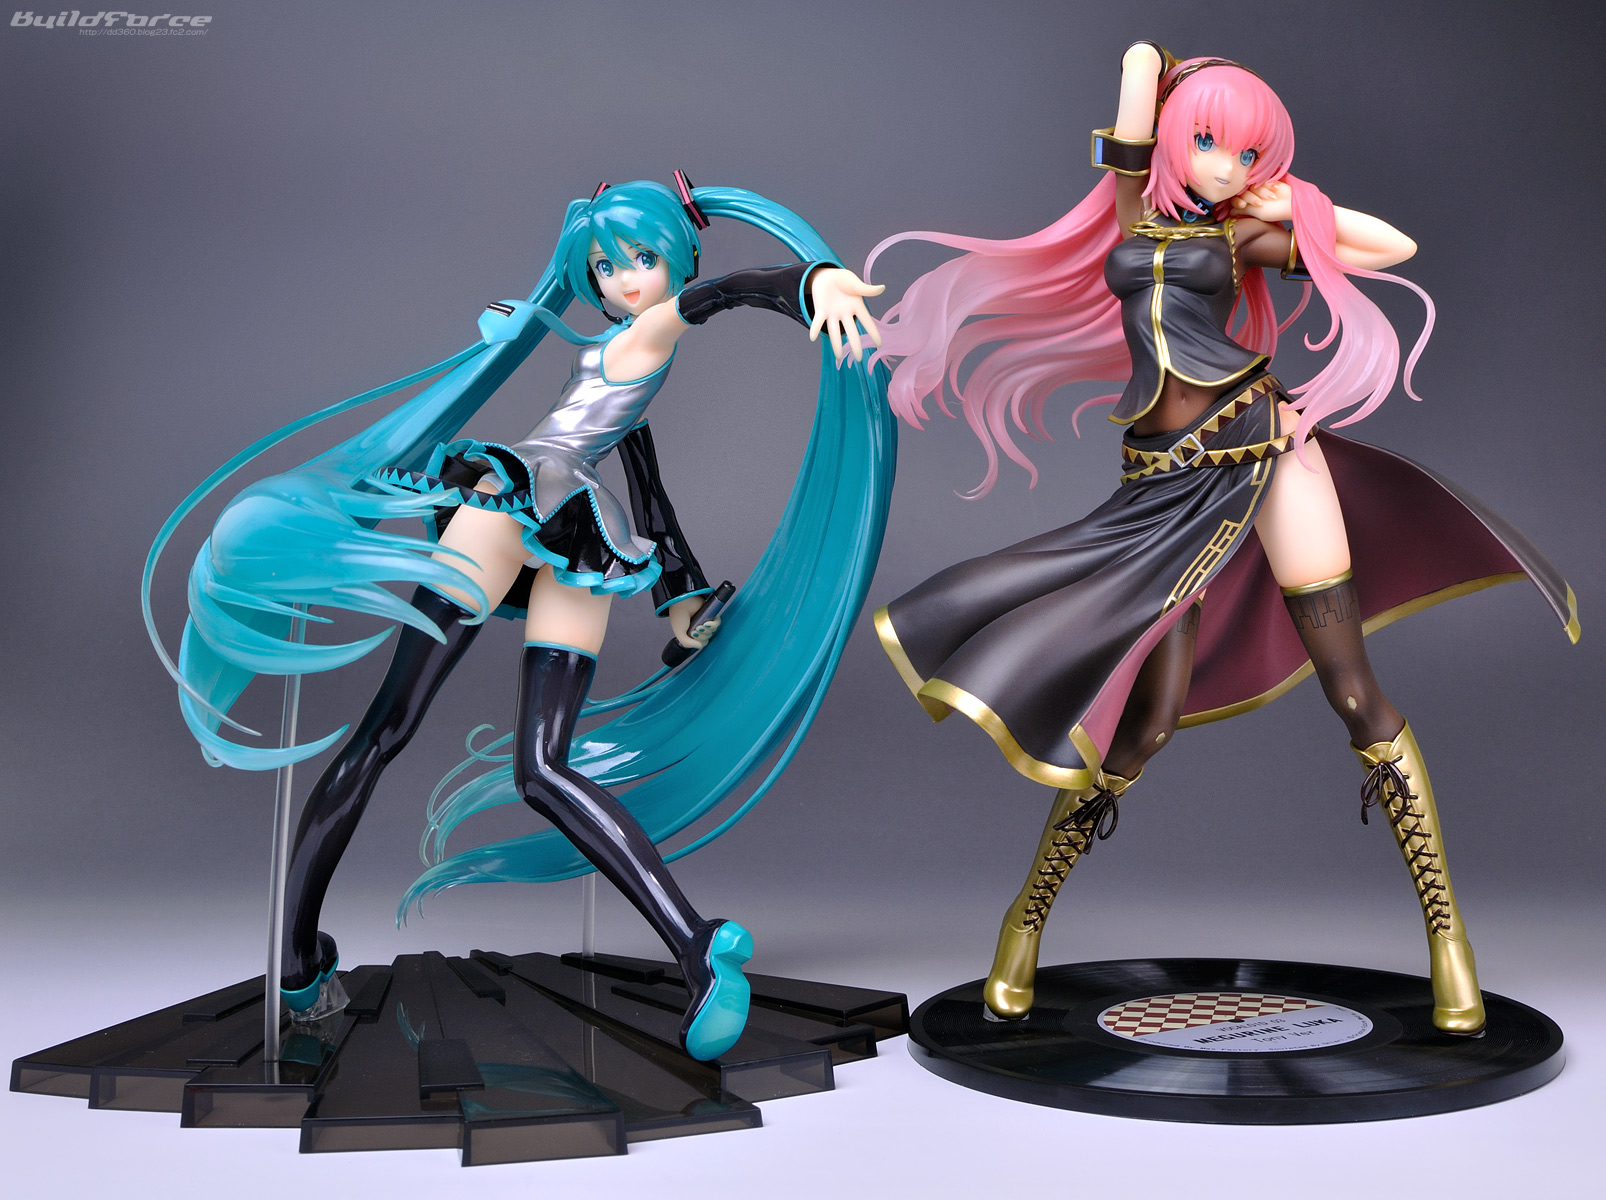 1/7 Megurine Luka (Vocaloid 03) Tony Ver. FULL Photoreview & FULL 